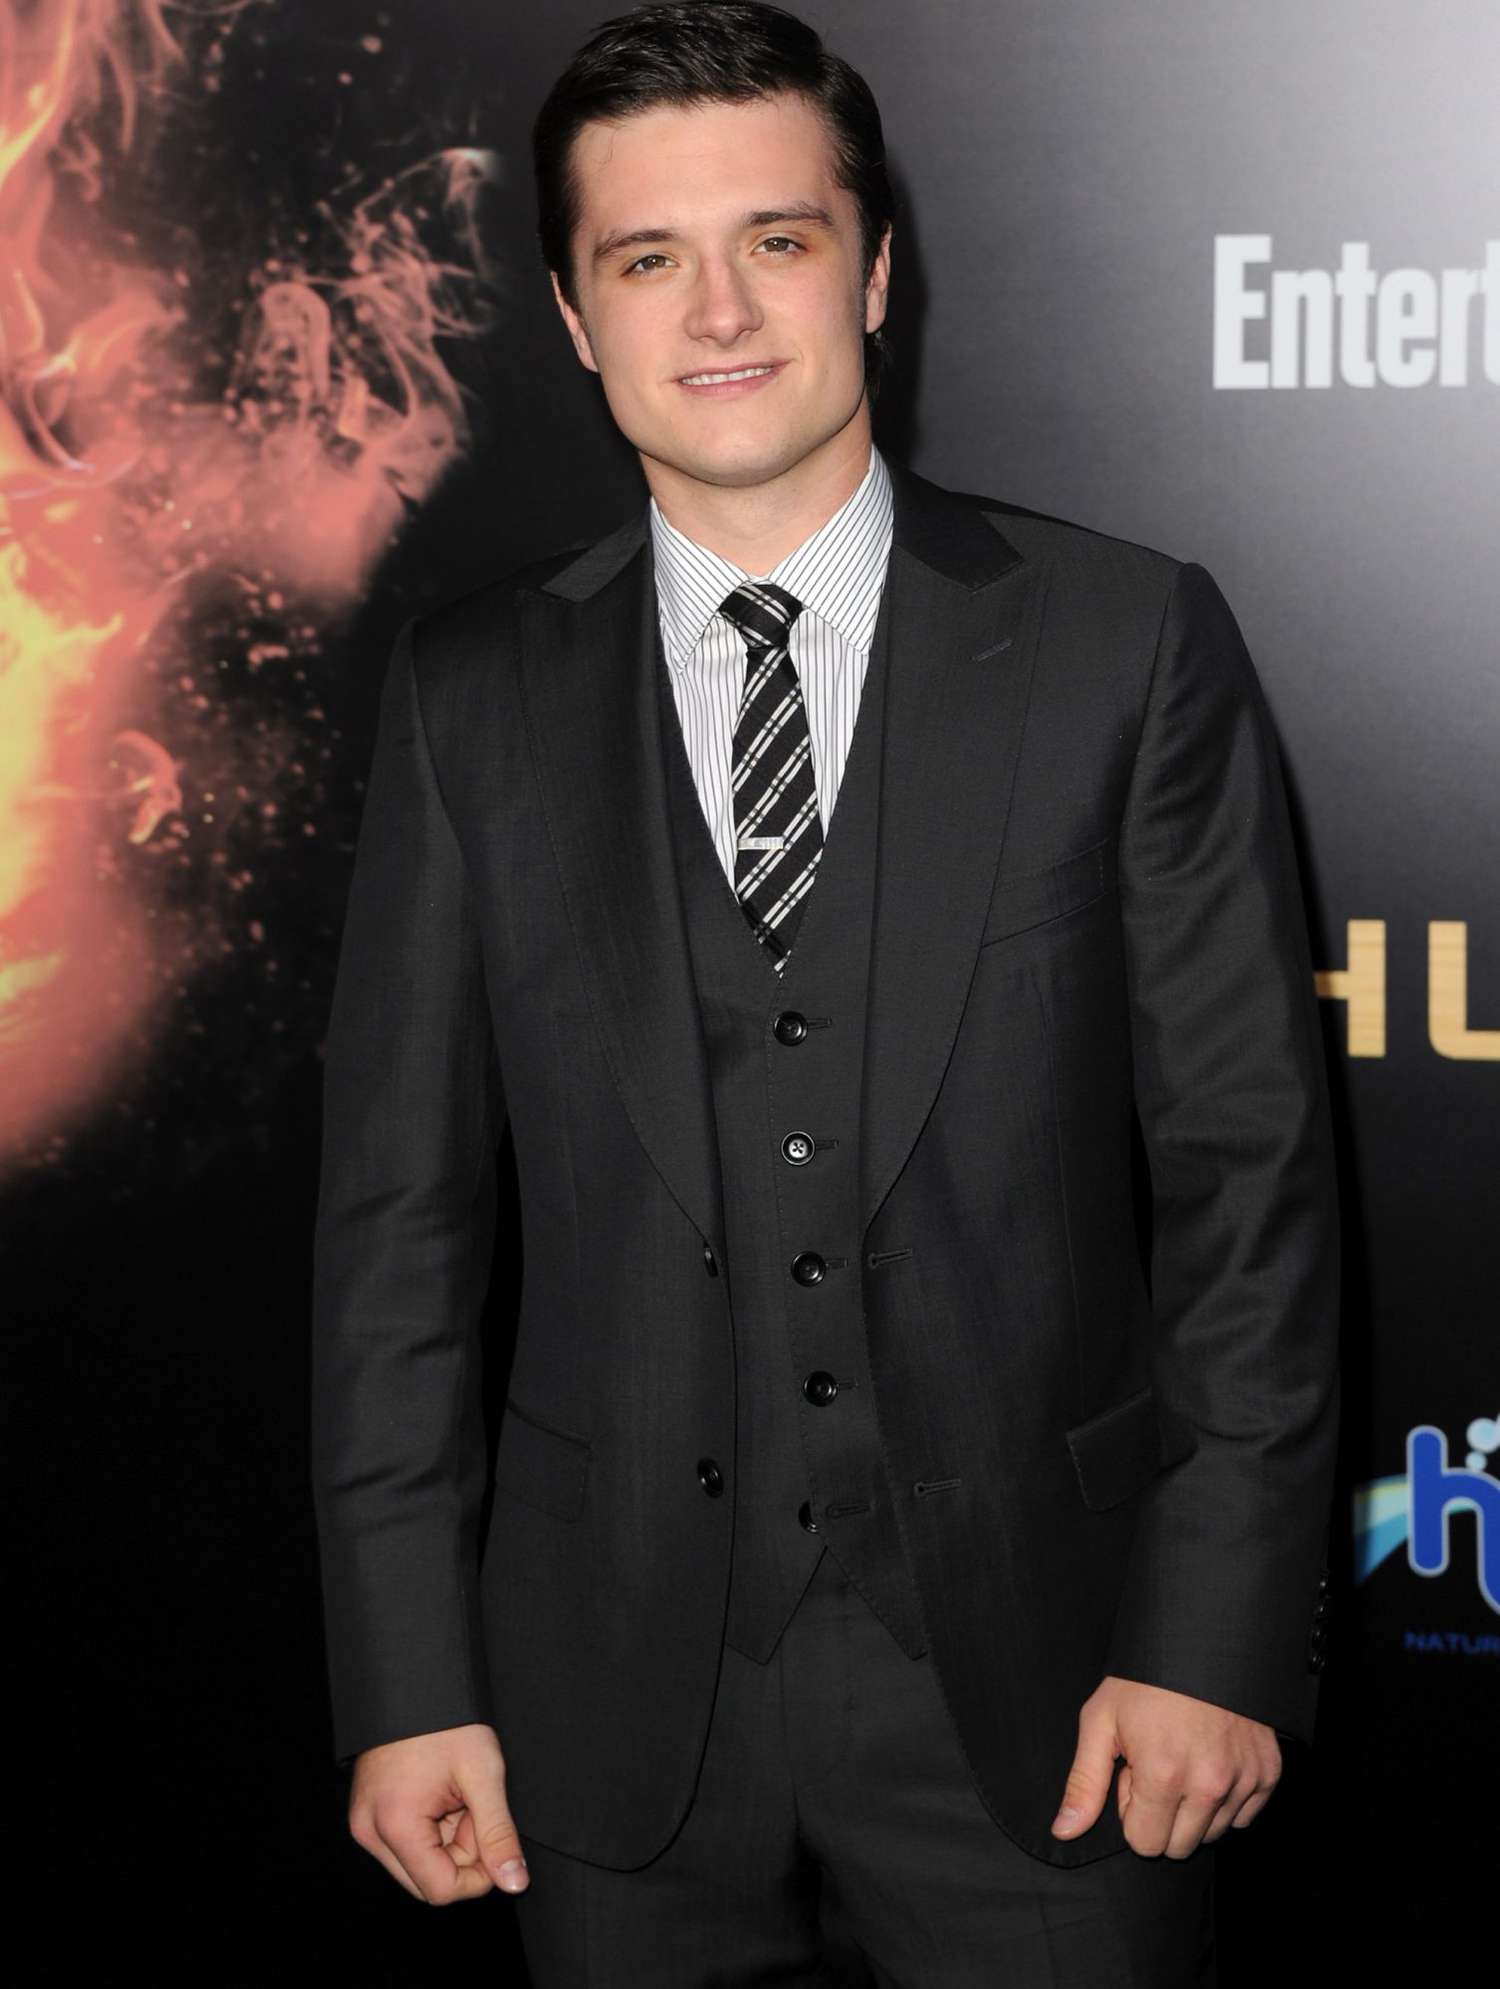 Premiere Of Lionsgate's "The Hunger Games" - Arrivals